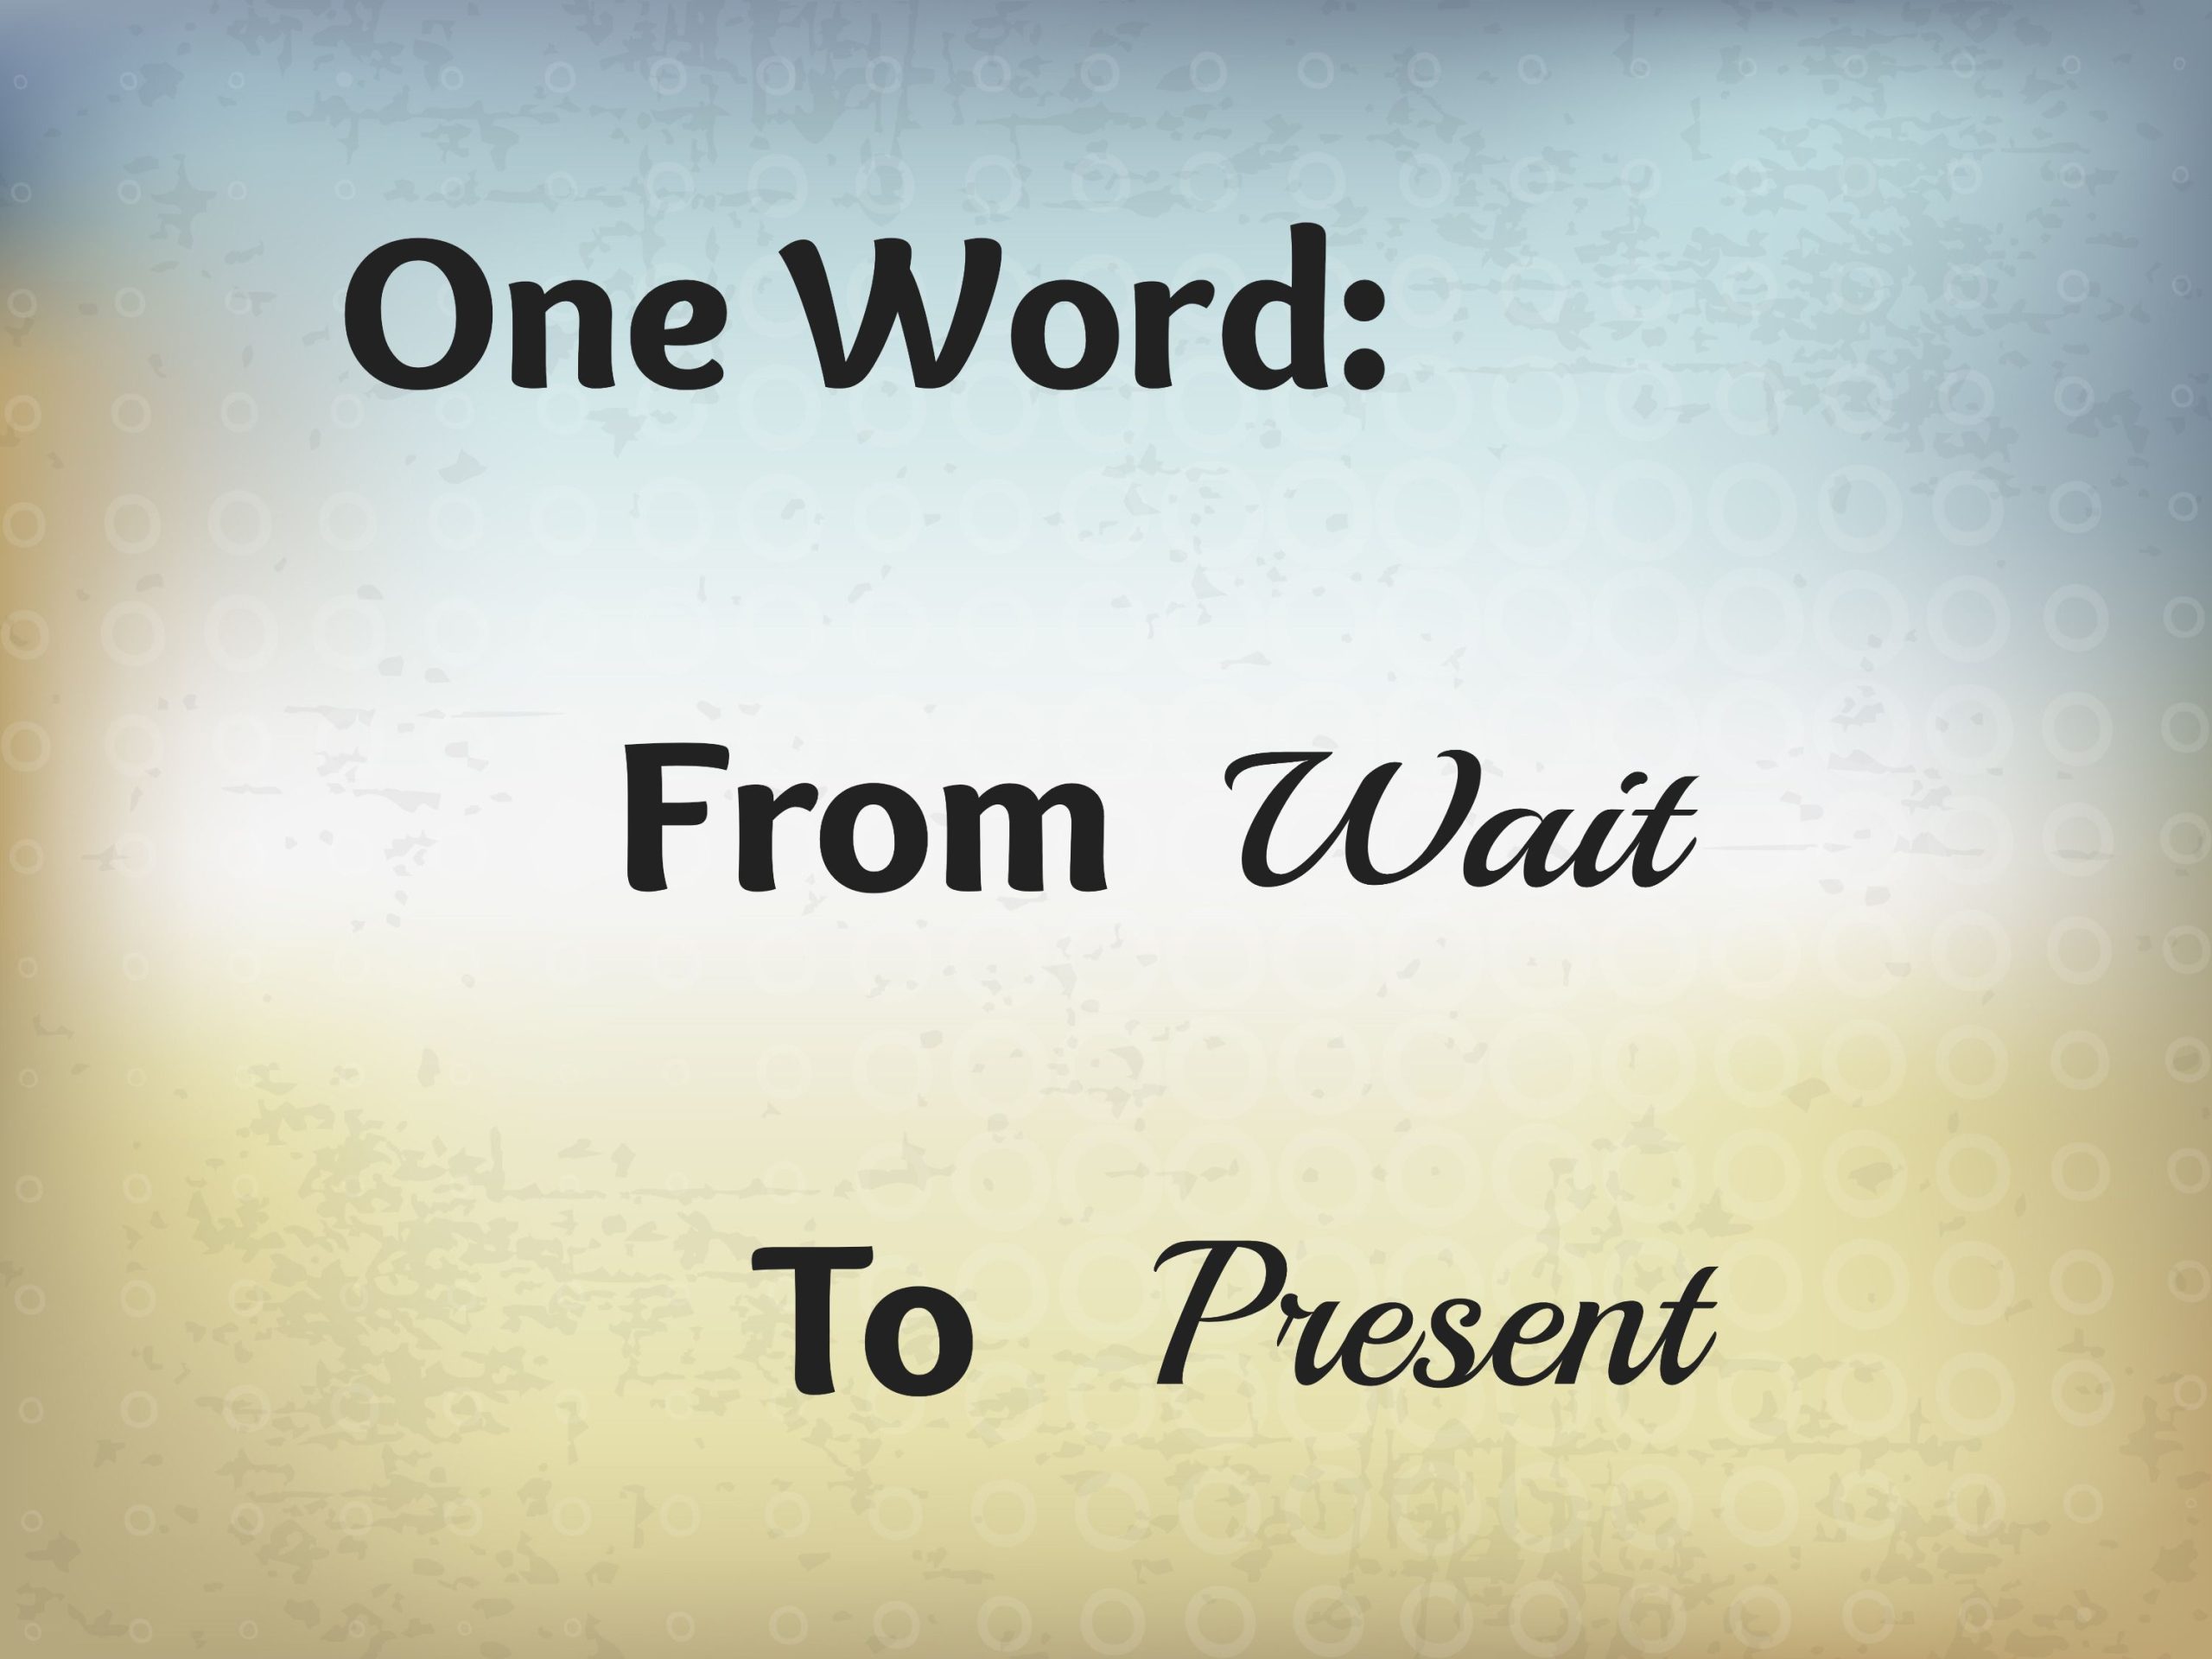 One Word: from wait to present